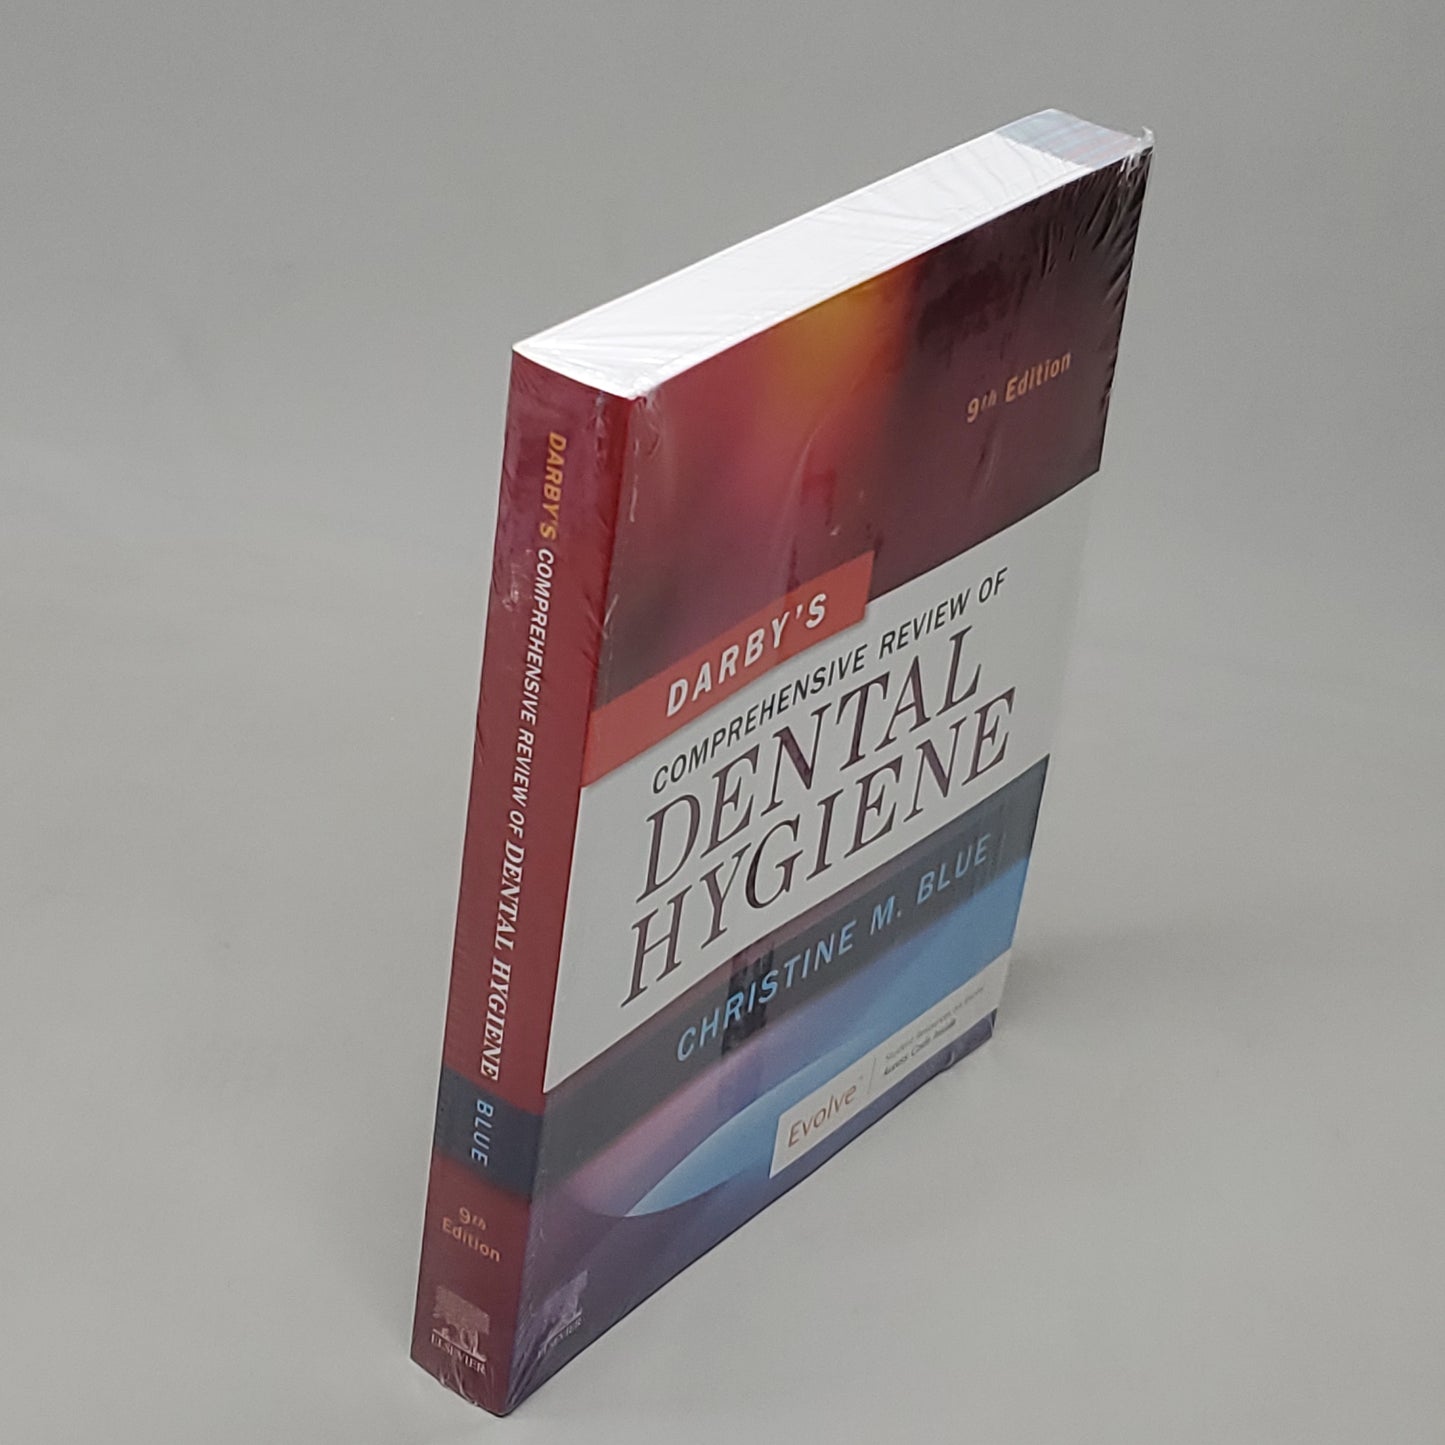 ELSEVIER Darby's Comprehensive Review of Dental Hygiene 9th Edition by Christine M. Blue  Textbook(New)